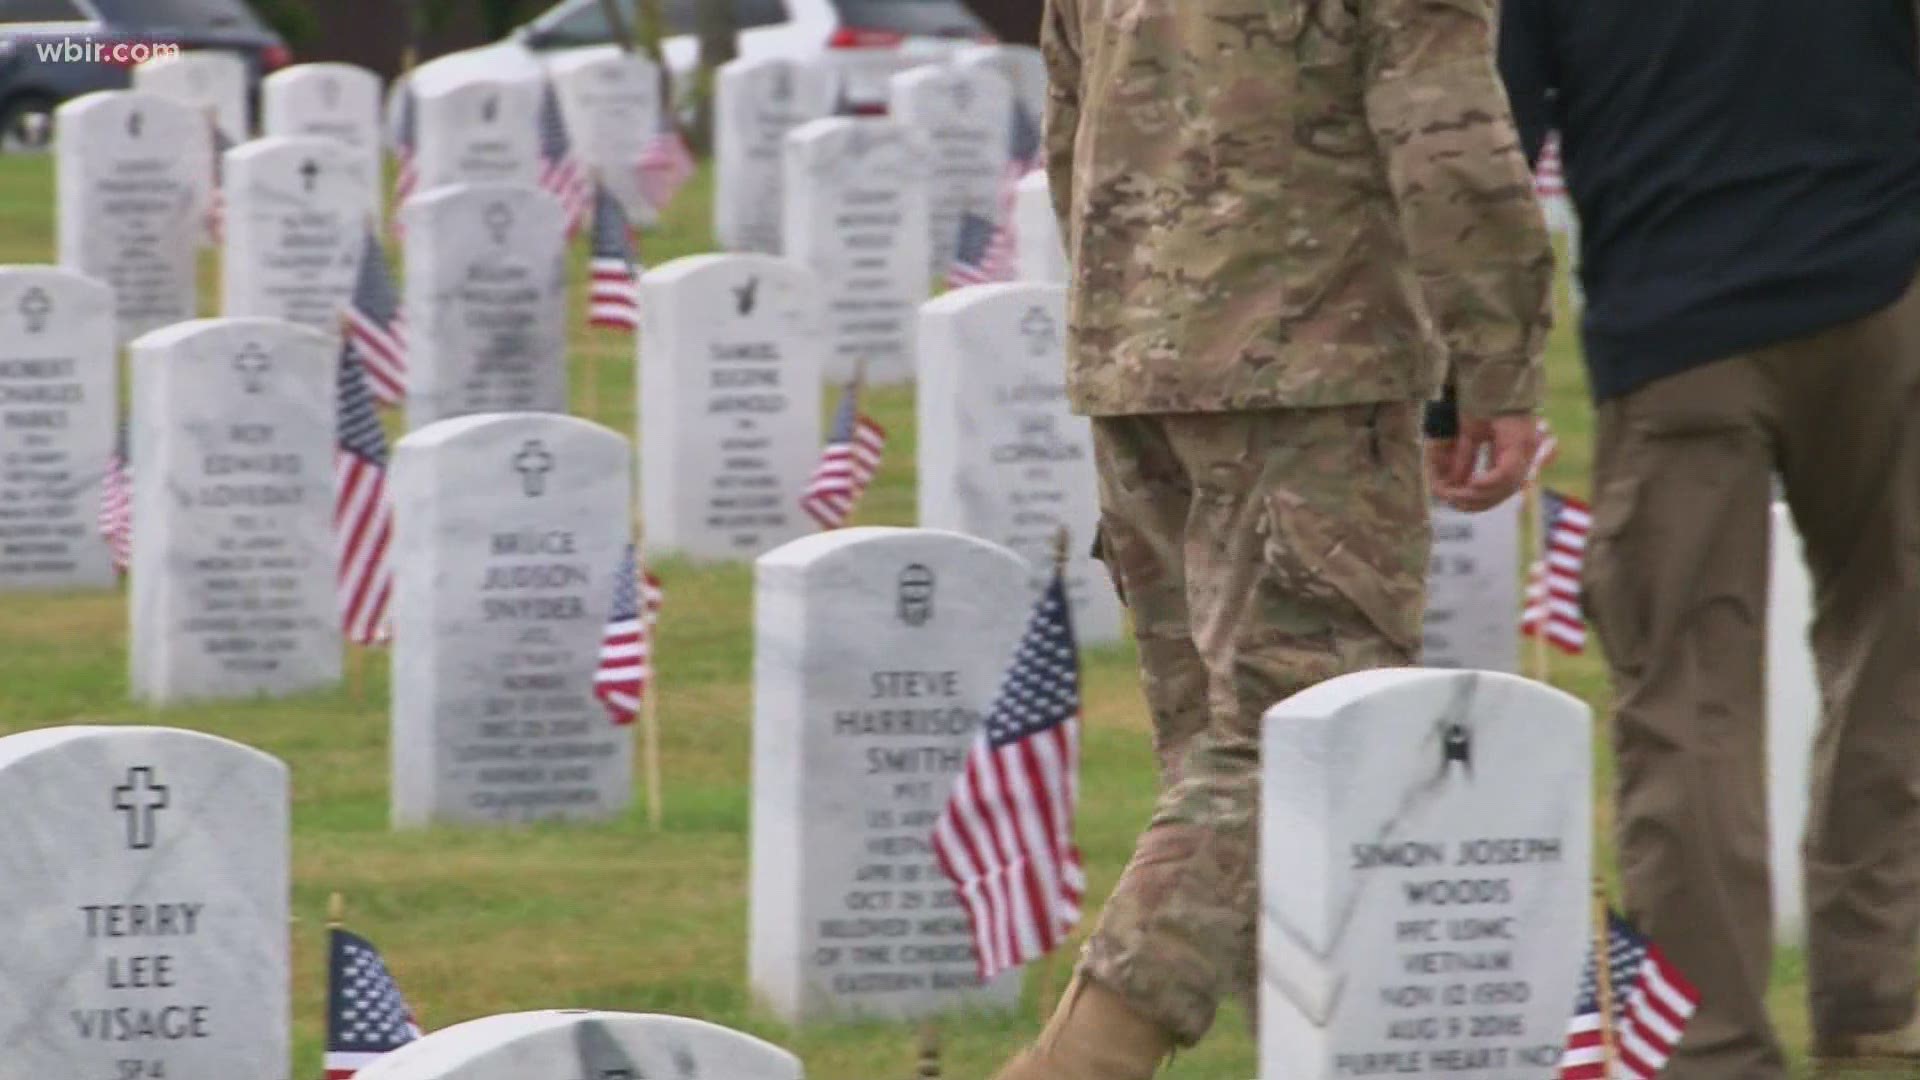 It's an annual tradition to honor those who served ahead of Memorial Day.